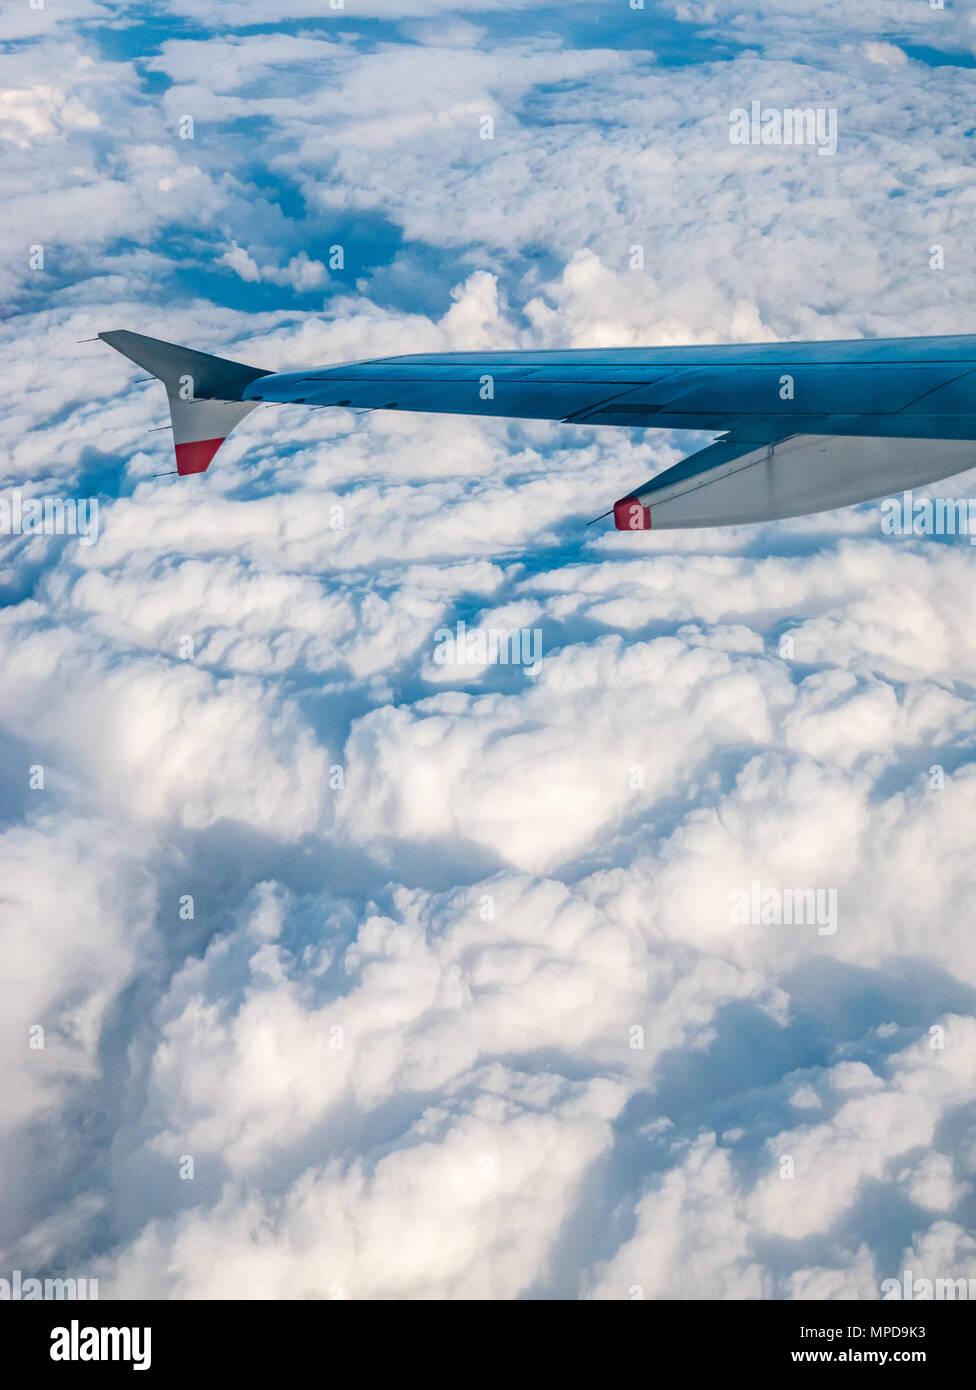 British Airways Airbus 319 plane wing seen from plane window during flight above puffy white clouds in United Kingdom Stock Photo